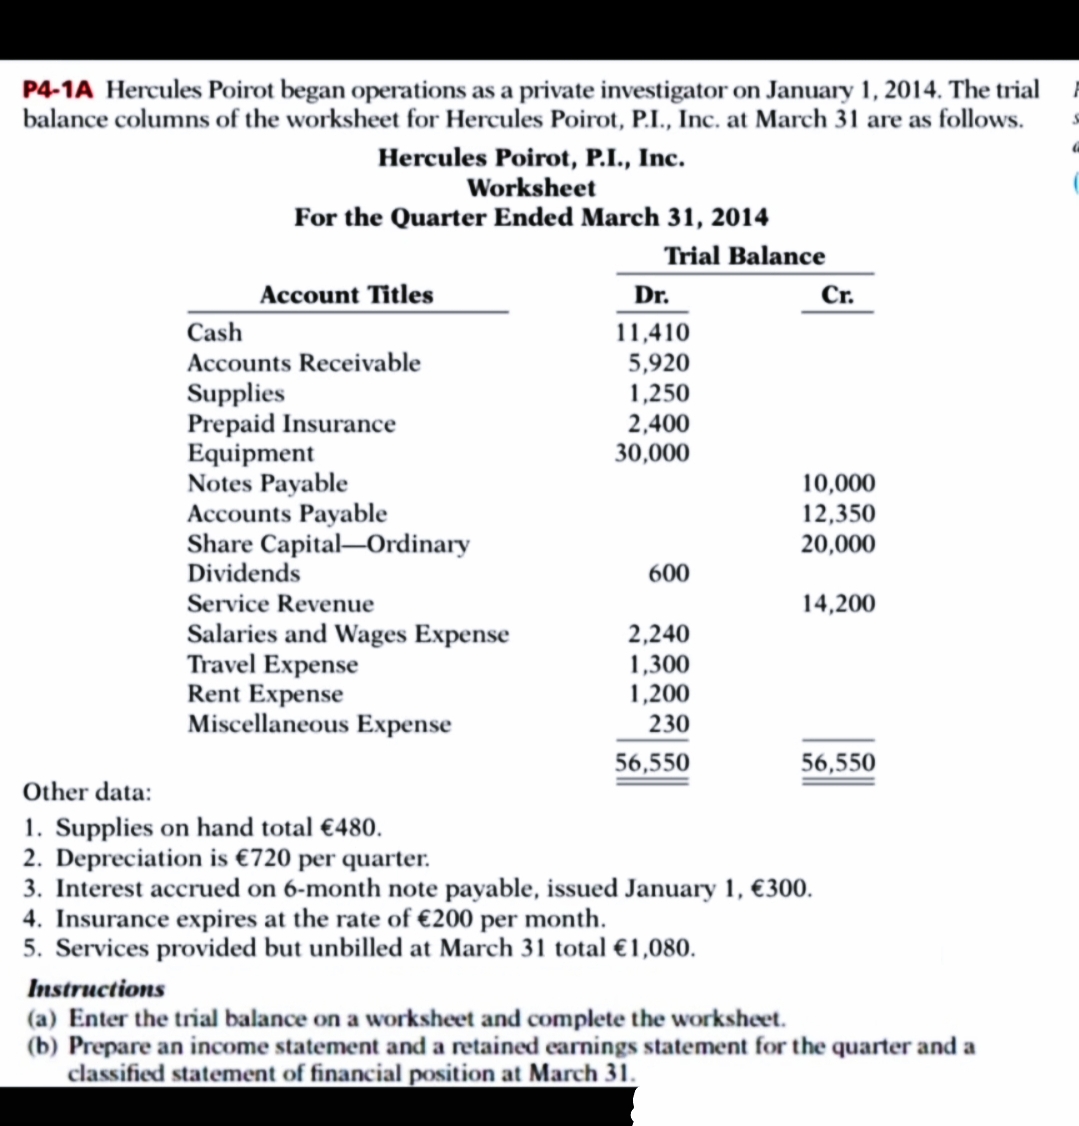 P4-1A Hercules Poirot began operations as a private investigator on January 1, 2014. The trial
balance columns of the worksheet for Hercules Poirot, P.I., Inc. at March 31 are as follows.
Hercules Poirot, P.I., Inc.
Worksheet
For the Quarter Ended March 31, 2014
Trial Balance
Cr.
Account Titles
Dr.
Cash
Accounts Receivable
Supplies
Prepaid Insurance
Equipment
Notes Payable
Accounts Payable
Share Capital–Ordinary
Dividends
11,410
5,920
1,250
2,400
30,000
10,000
12,350
20,000
600
Service Revenue
14,200
Salaries and Wages Expense
Travel Expense
Rent Expense
Miscellaneous Expense
2,240
1,300
1,200
230
56,550
56,550
Other data:
1. Supplies on hand total €480.
2. Depreciation is €720 per quarter.
3. Interest accrued on 6-month note payable, issued January 1, €300.
4. Insurance expires at the rate of €200 per month.
5. Services provided but unbilled at March 31 total €1,080.
Instructions
(a) Enter the trial balance on a worksheet and complete the worksheet.
(b) Prepare an income statement and a retained earnings statement for the quarter and a
classified statement of financial position at March 31.
